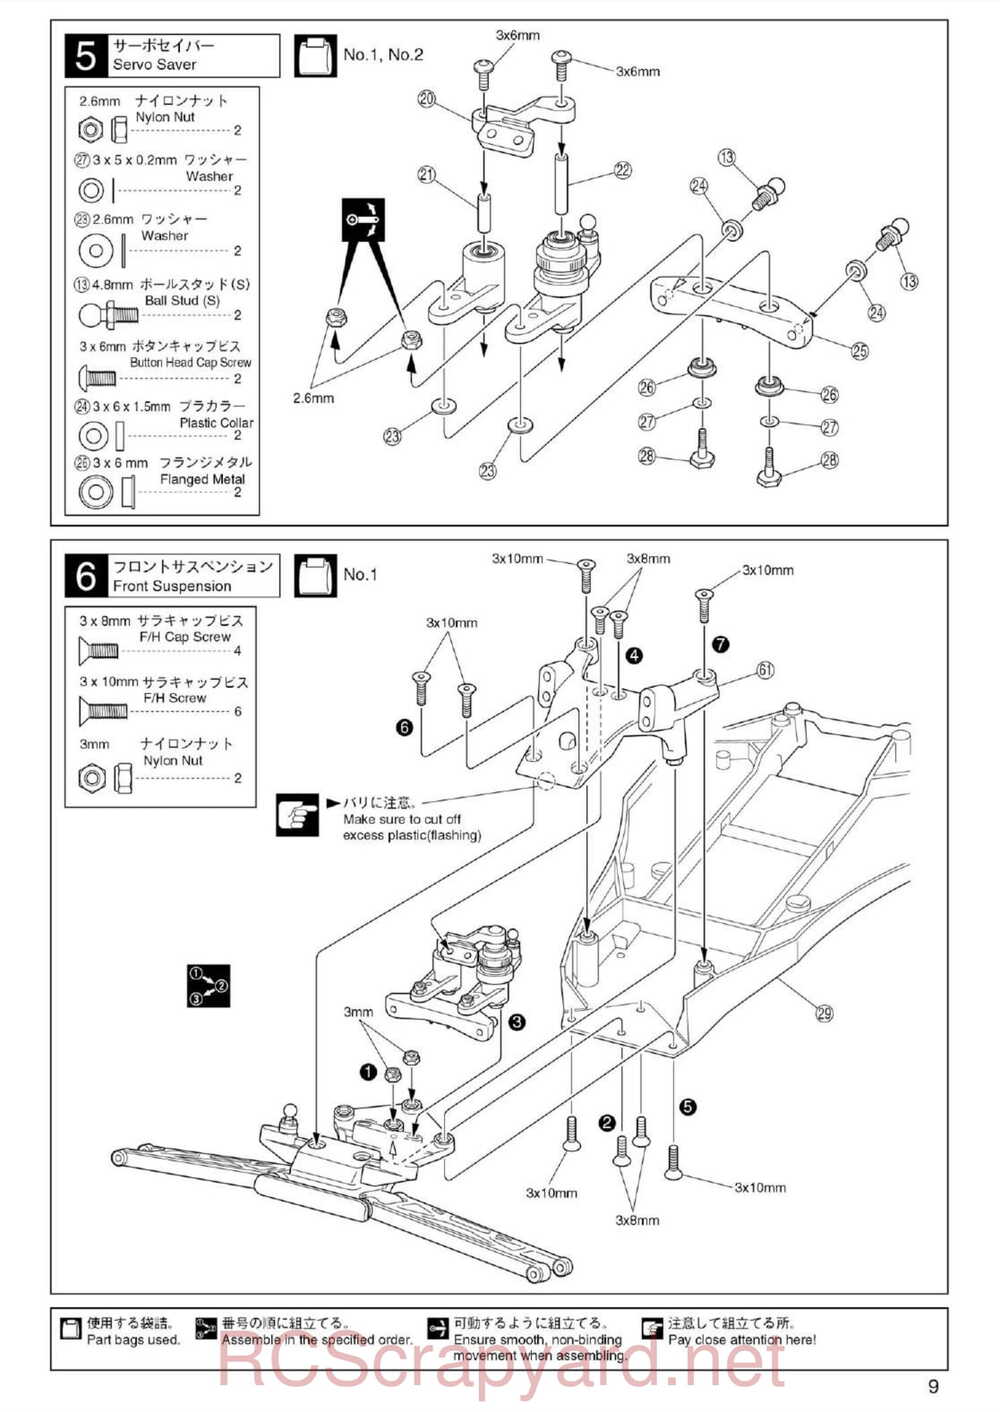 Kyosho - 30074 - Ultima-RB5 - Manual - Page 09